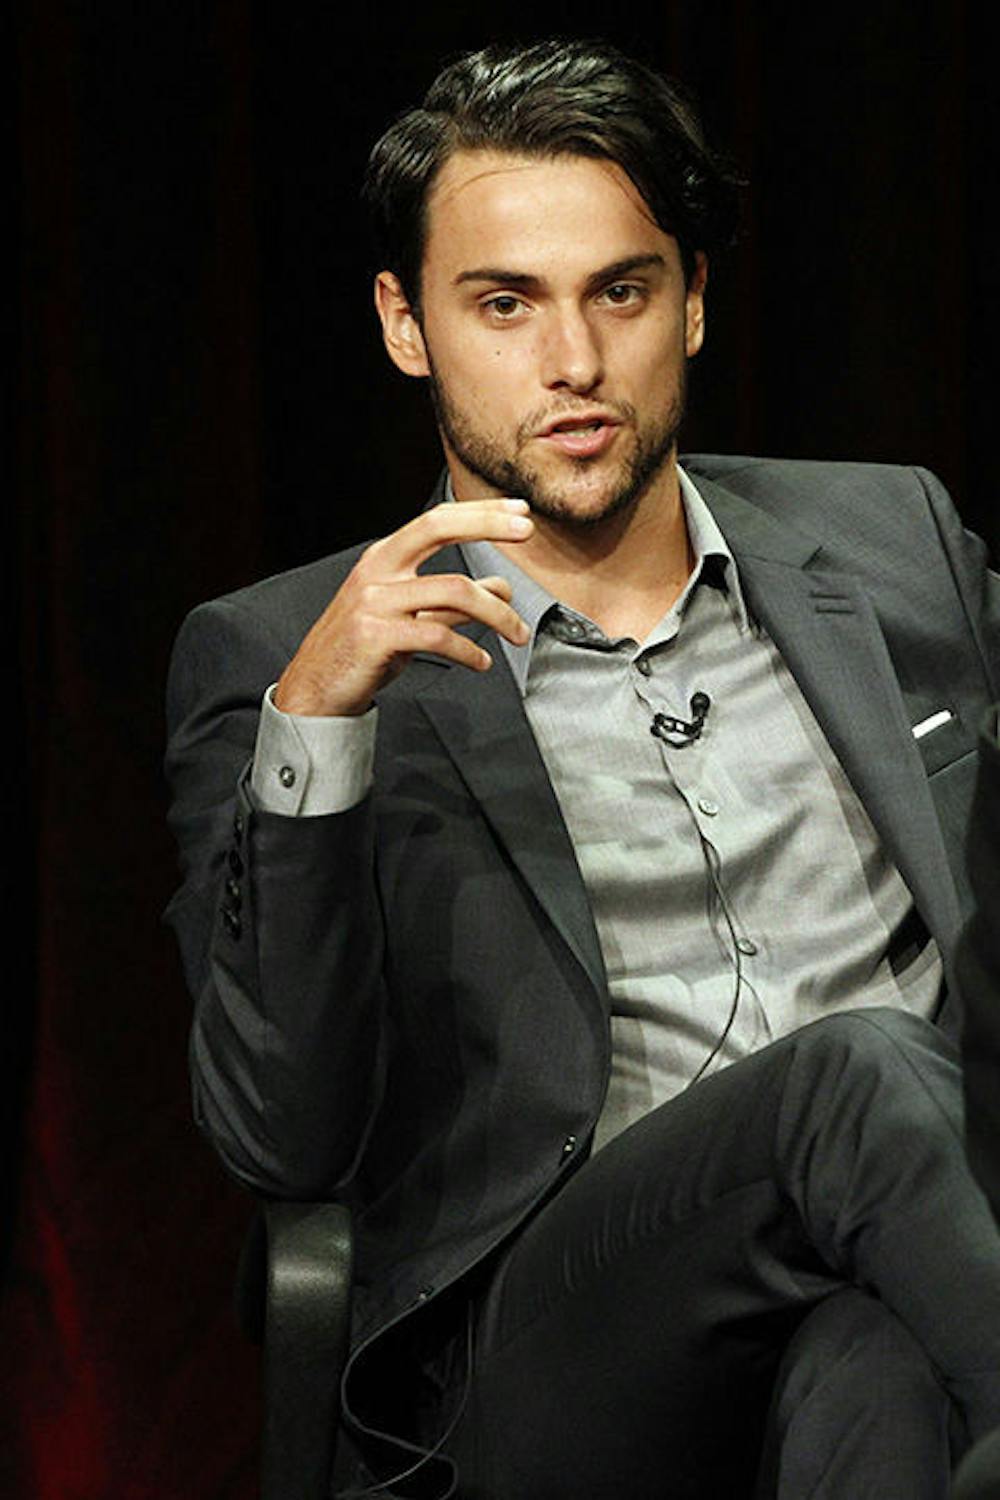 <p>TCA SUMMER PRESS TOUR 2014 - "How to Get Away with Murder" Session - The cast and producers of ABC's "How to Get Away with Murder" addressed the press at Disney | ABC Television Group's Summer Press Tour 2014. (ABC/Rick Rowell) JACK FALAHEE</p>